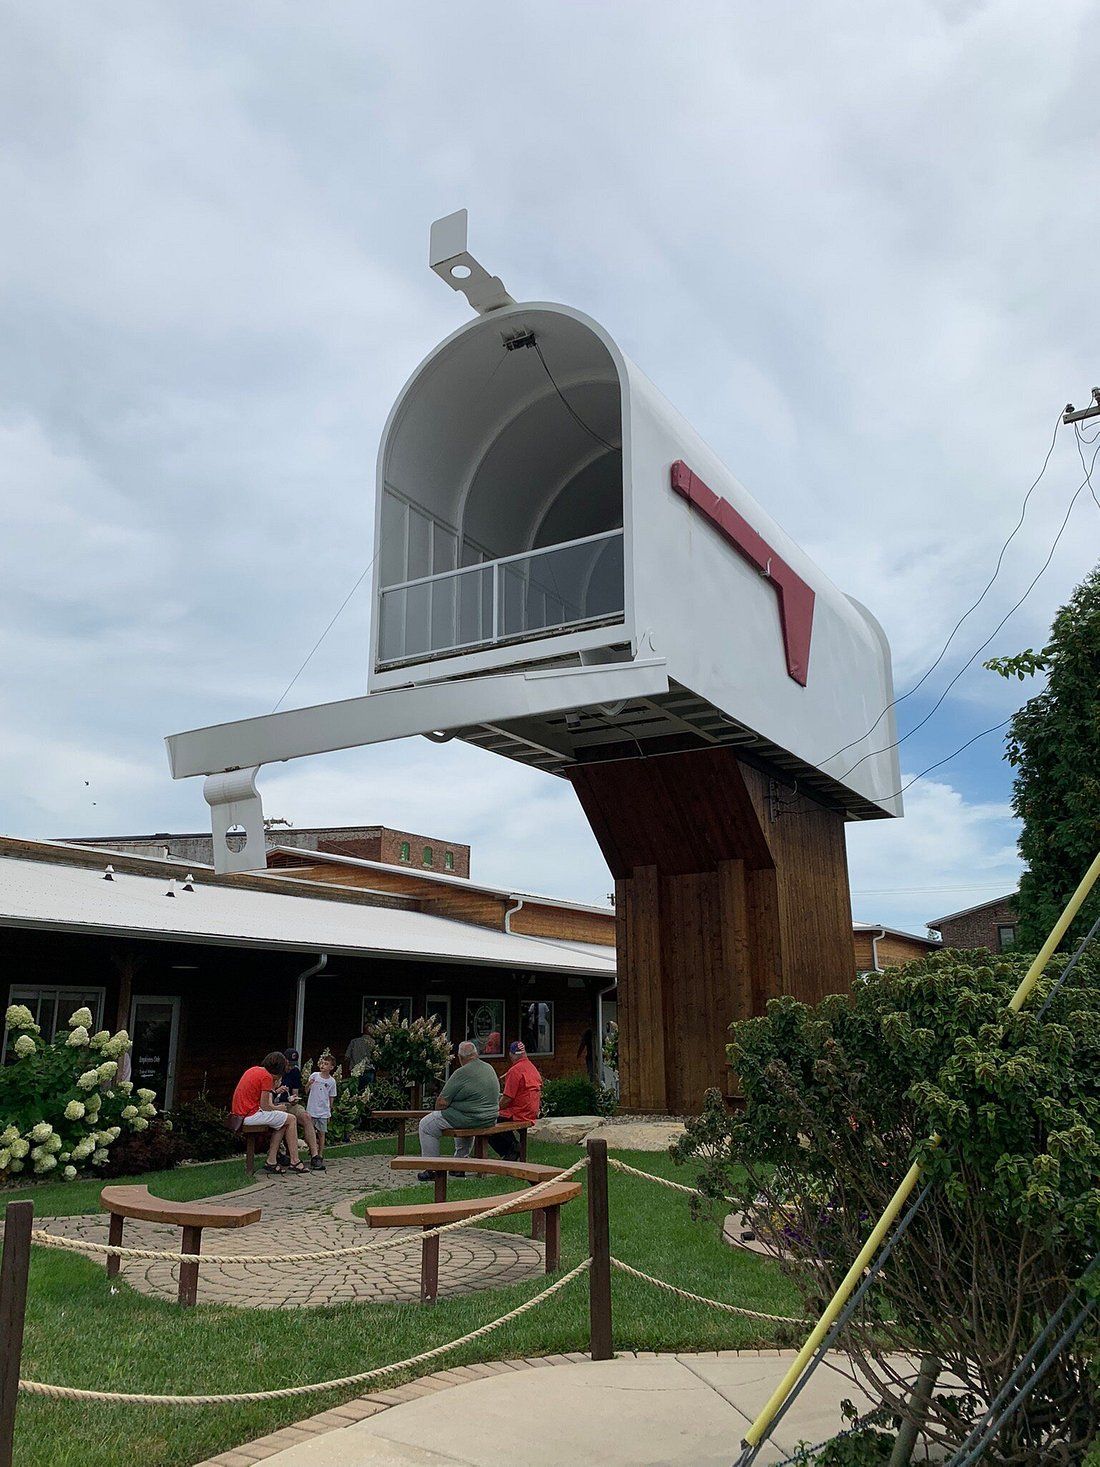 World’s Largest Mailbox, world record in Casey, Illinois
